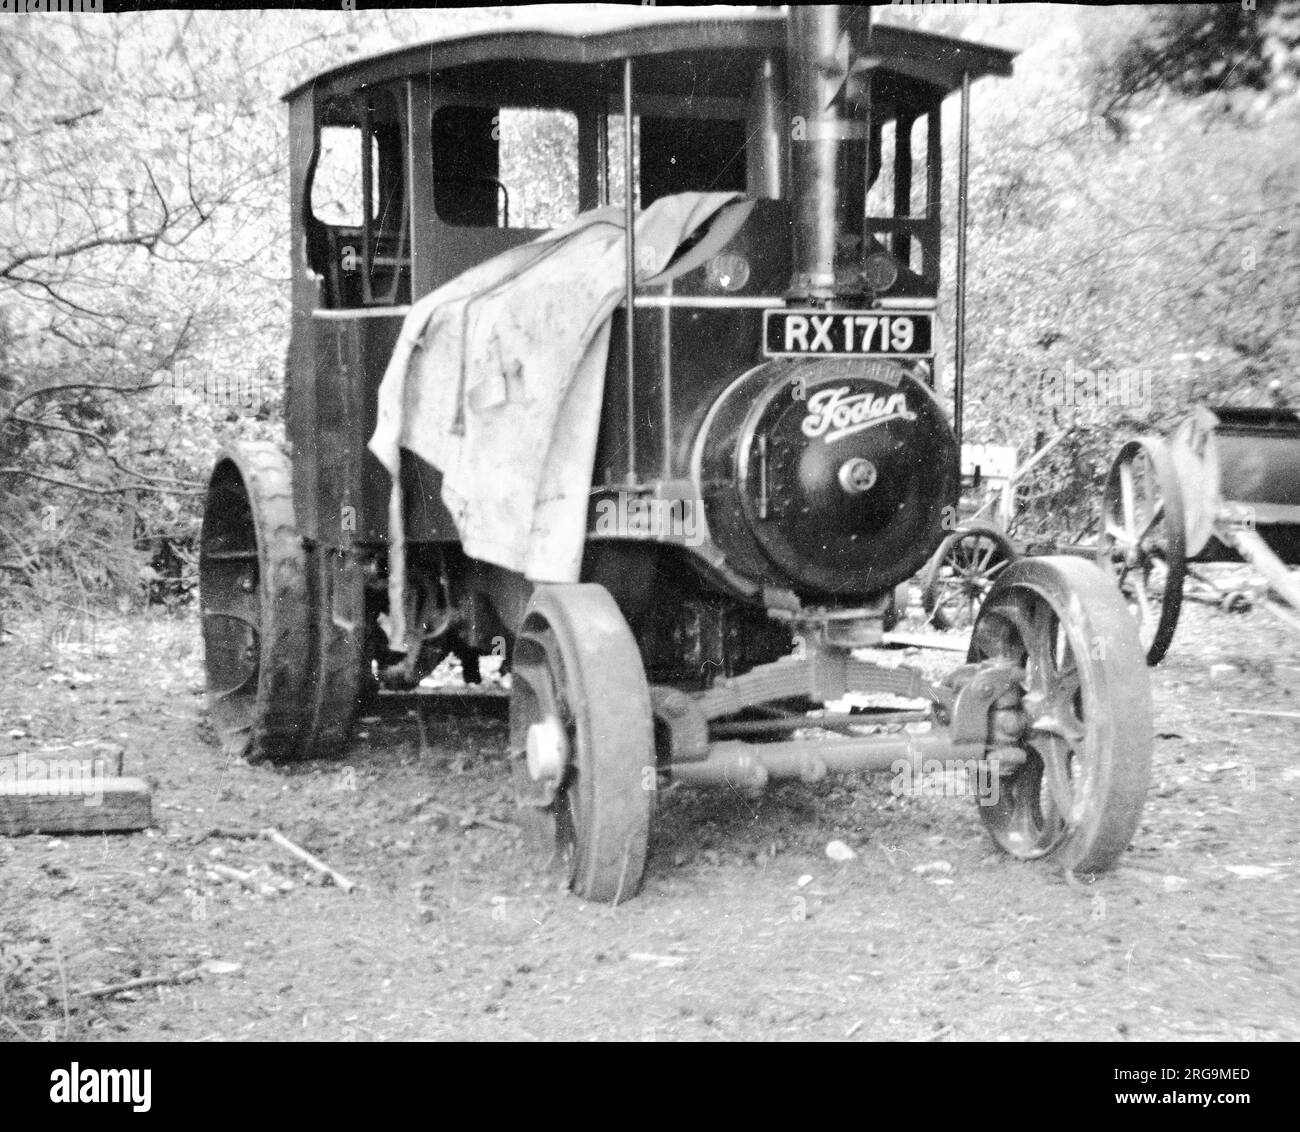 Foden D-type Steam Wagon reg. RX1719 Early Bird (msn 12852), built 1927, at Ferndown in dorset. (Foden Trucks was a British truck and bus manufacturing company which had its origins in Elworth near Sandbach in 1856). From auction catalogue: 1928 Foden Timber Tractor No. 12852 Reg No. RX 1719. D Type. Double crank compound. Three speed. Early Bird Foden D Type No. 12852 left the Sandbach works in March 1928. Delivered to Chawley Works Ltd, Chawley, Berks where it worked for a number of years before going to John Turner, Weston on the Green, Oxon; then to Lunnicks of Reading, where it had a cran Stock Photo